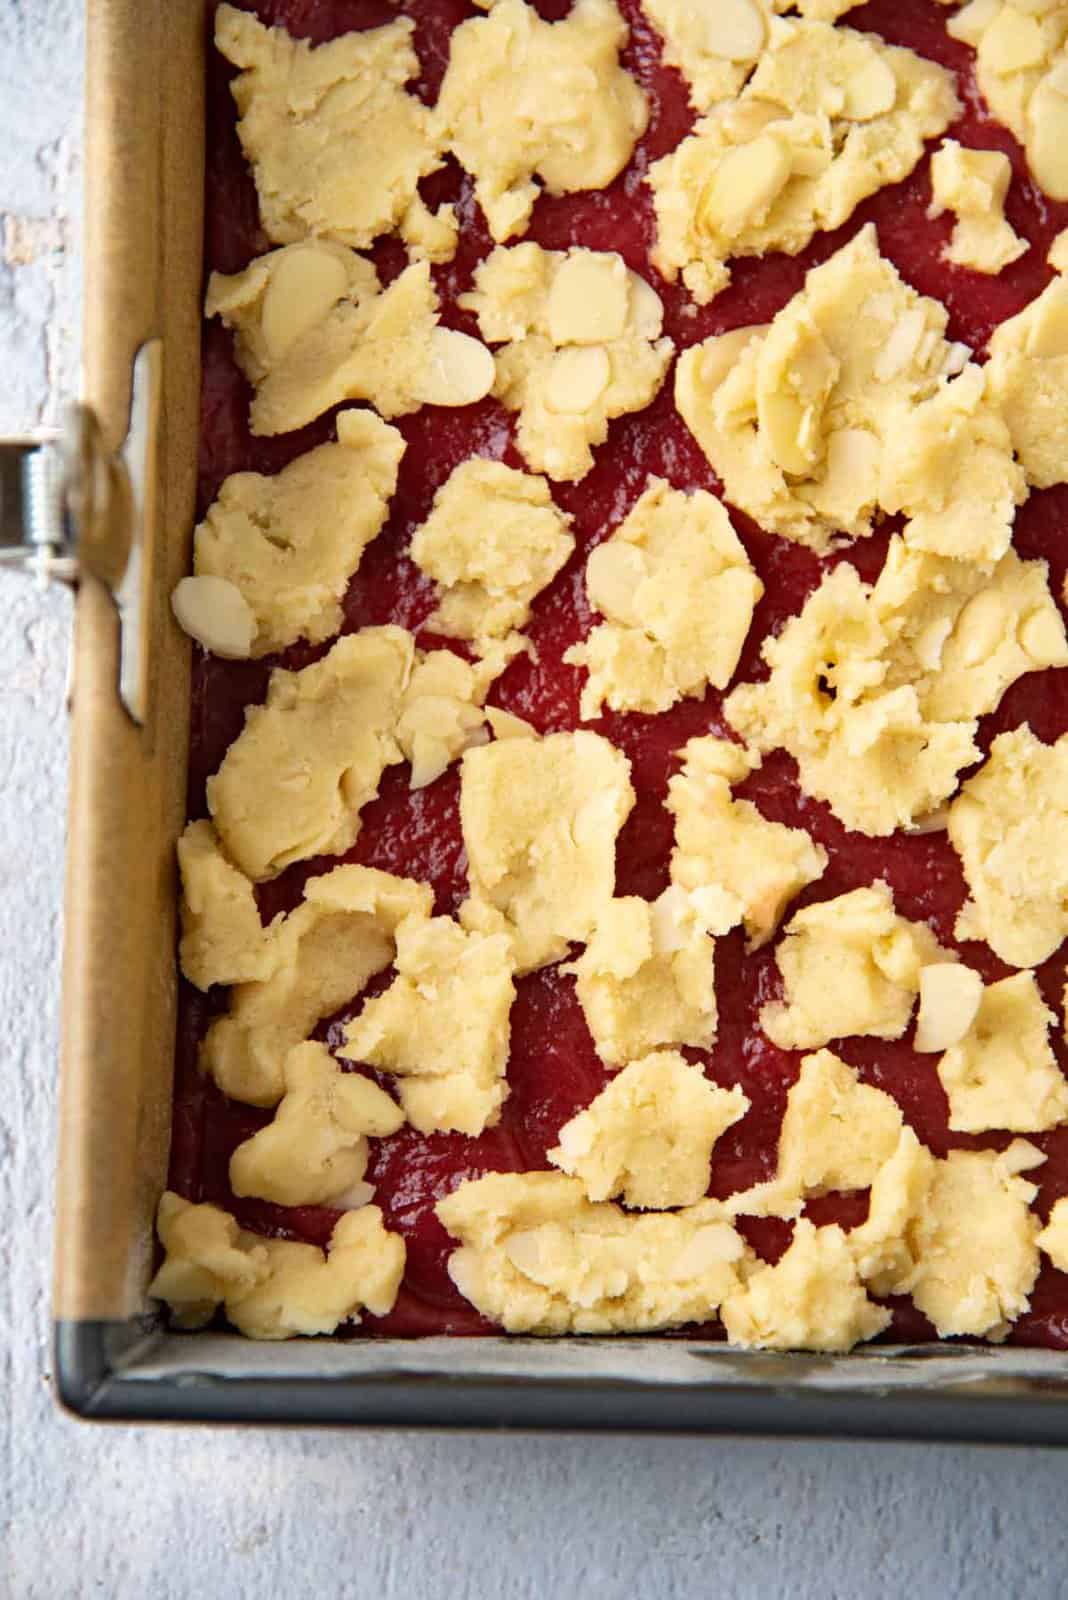 A close up of the shortbread crumble topping.